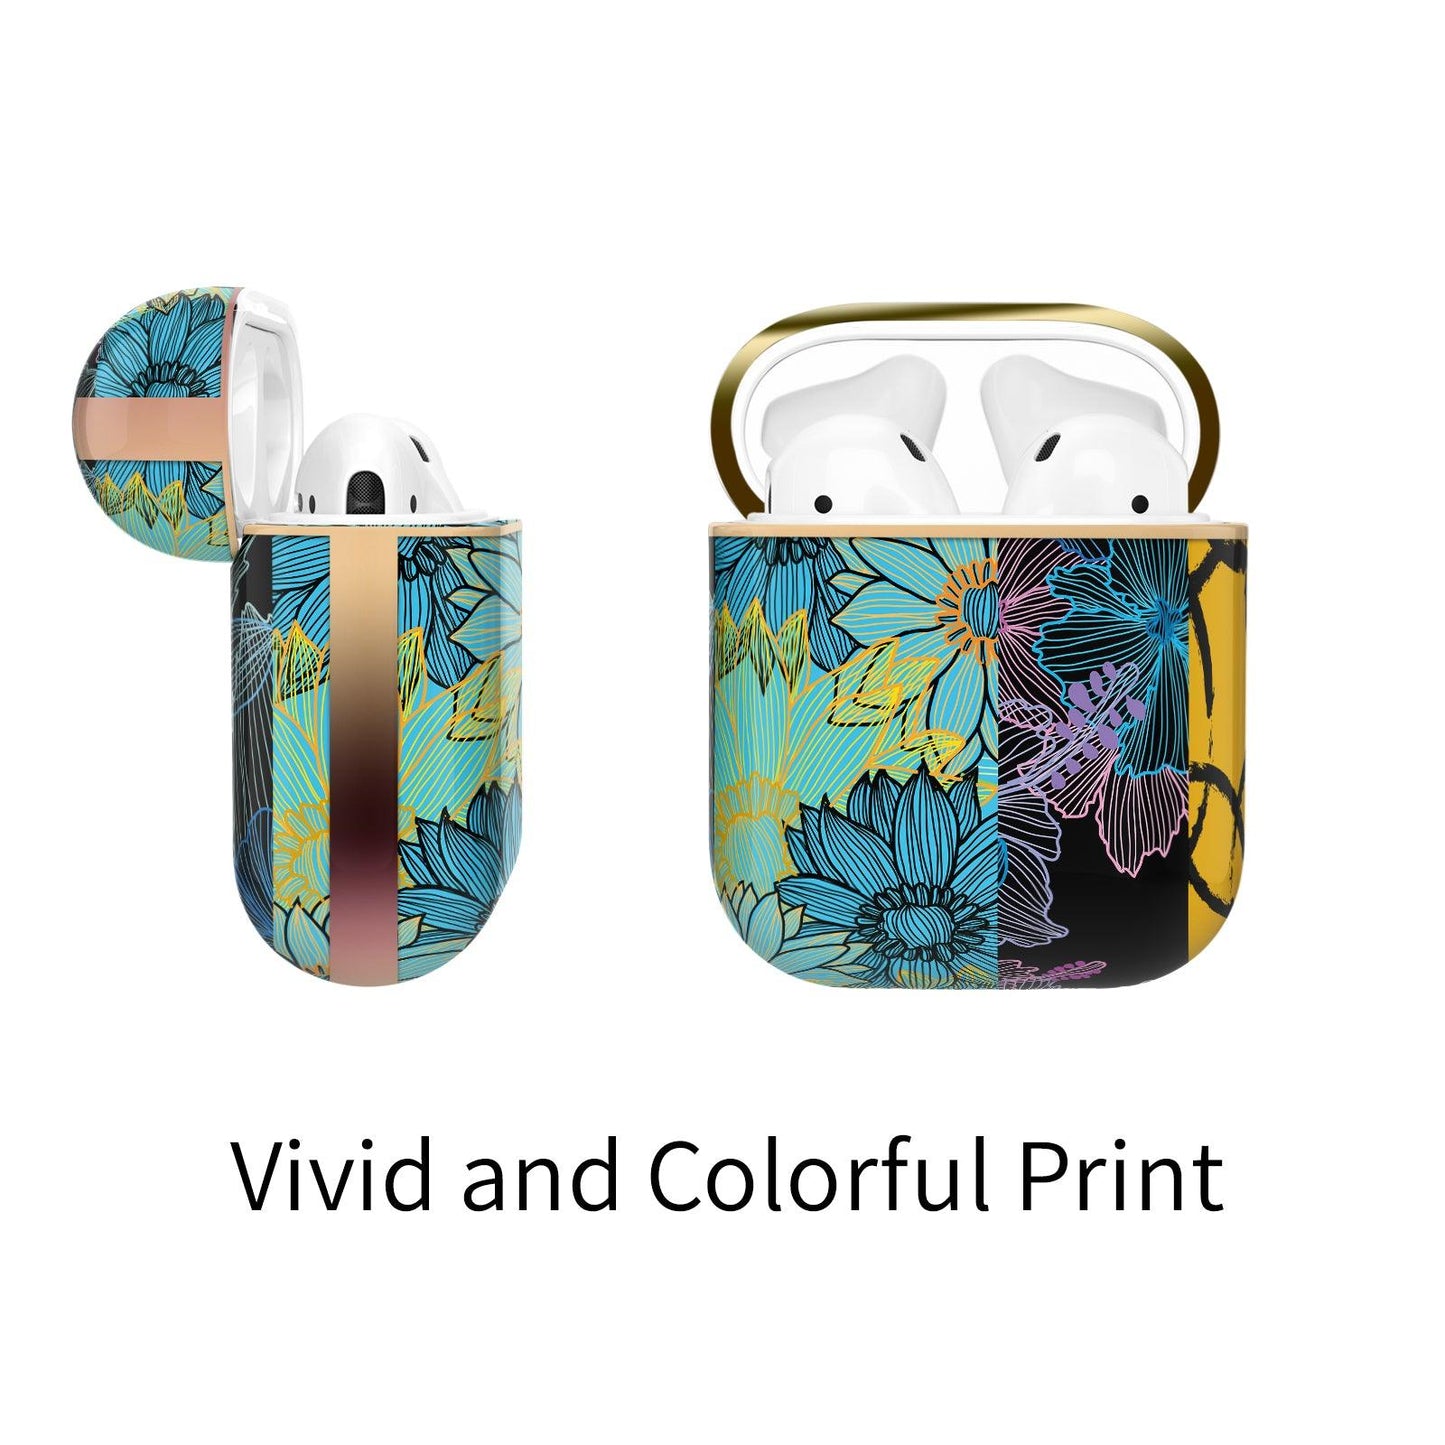 AirPods 3rd Generation Contemporary Cover, Hibiscus and Sunflower - Berkin Arts